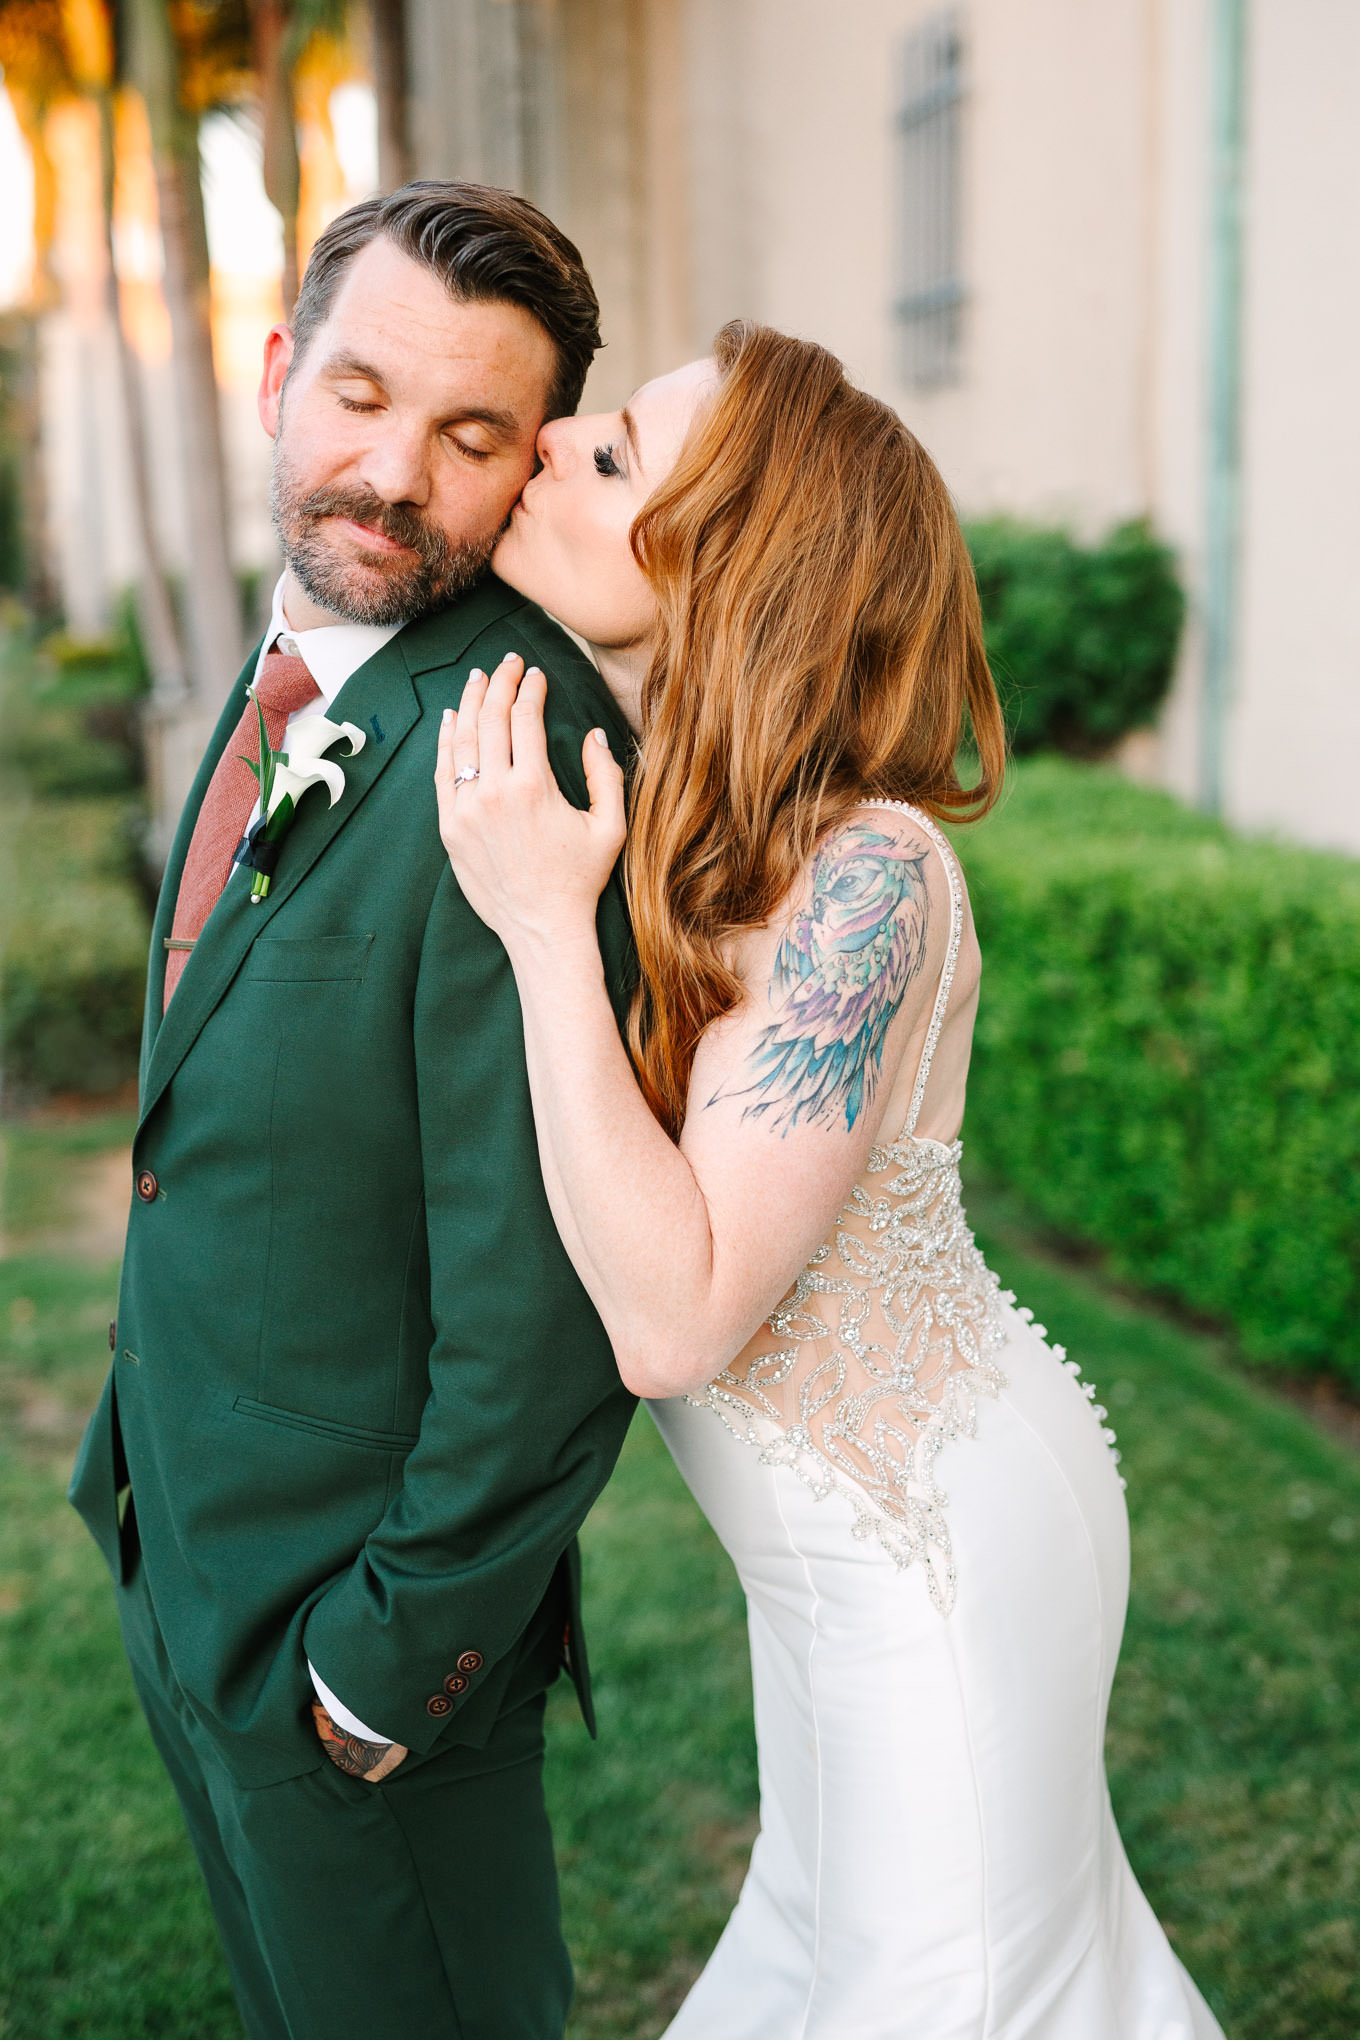 Ebell Long Beach Wedding | Wedding and elopement photography roundup | Los Angeles and Palm Springs  photographer | #losangeleswedding #palmspringswedding #elopementphotographer

Source: Mary Costa Photography | Los Angeles